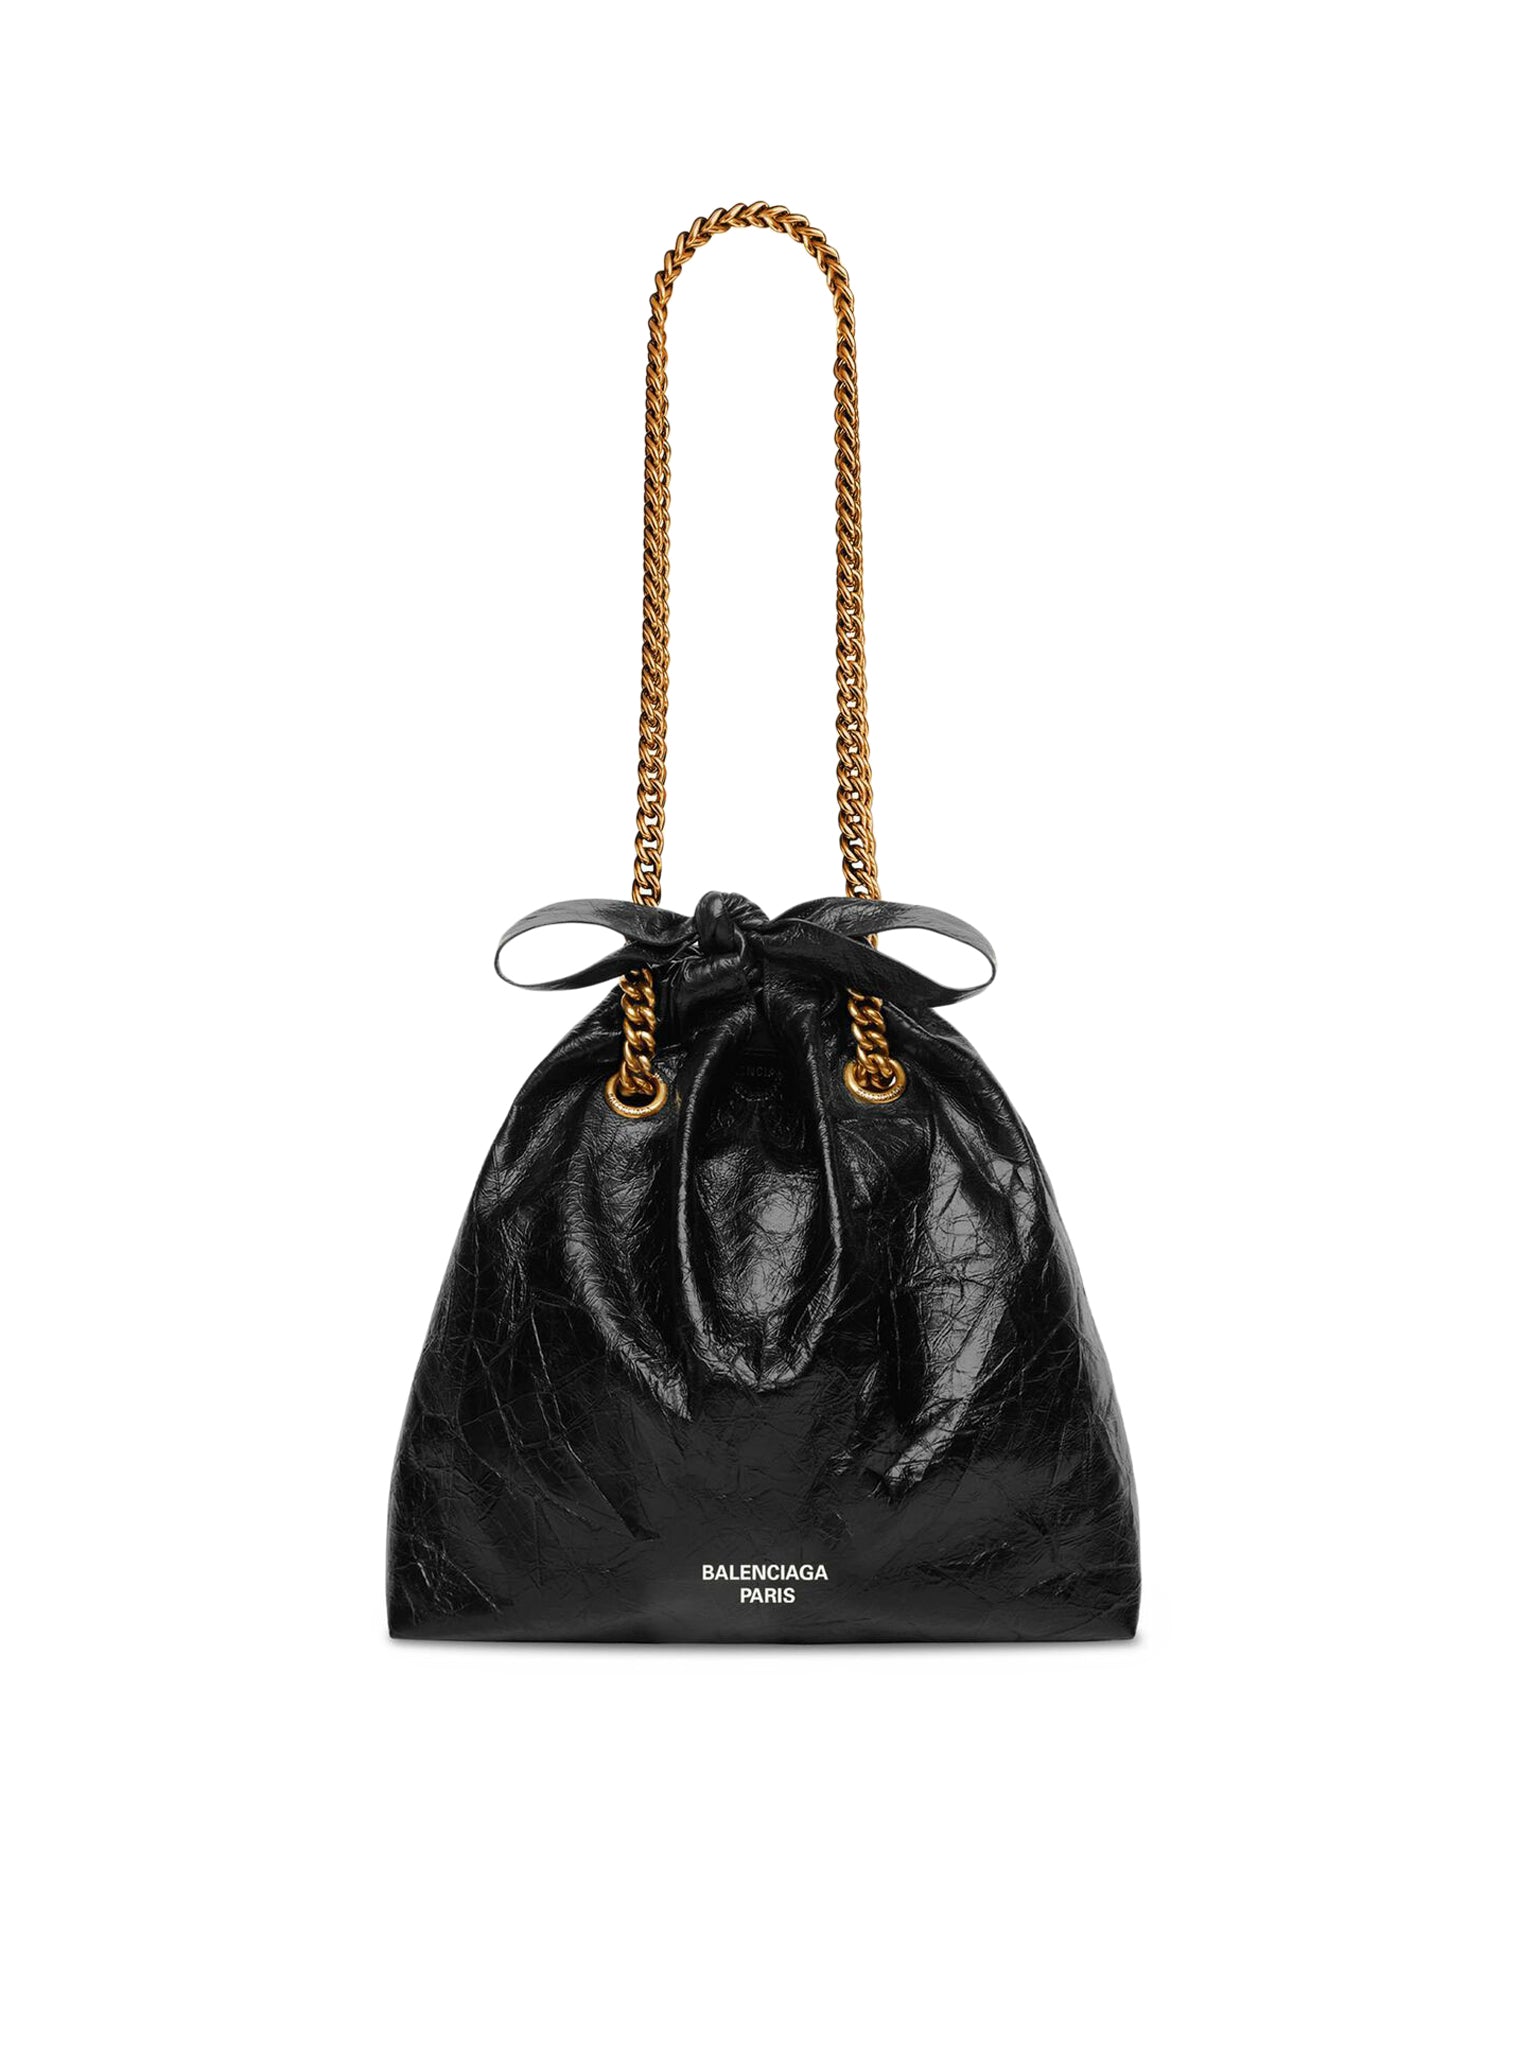 SMALL CRUSH TOTE BAG FOR WOMEN IN BLACK